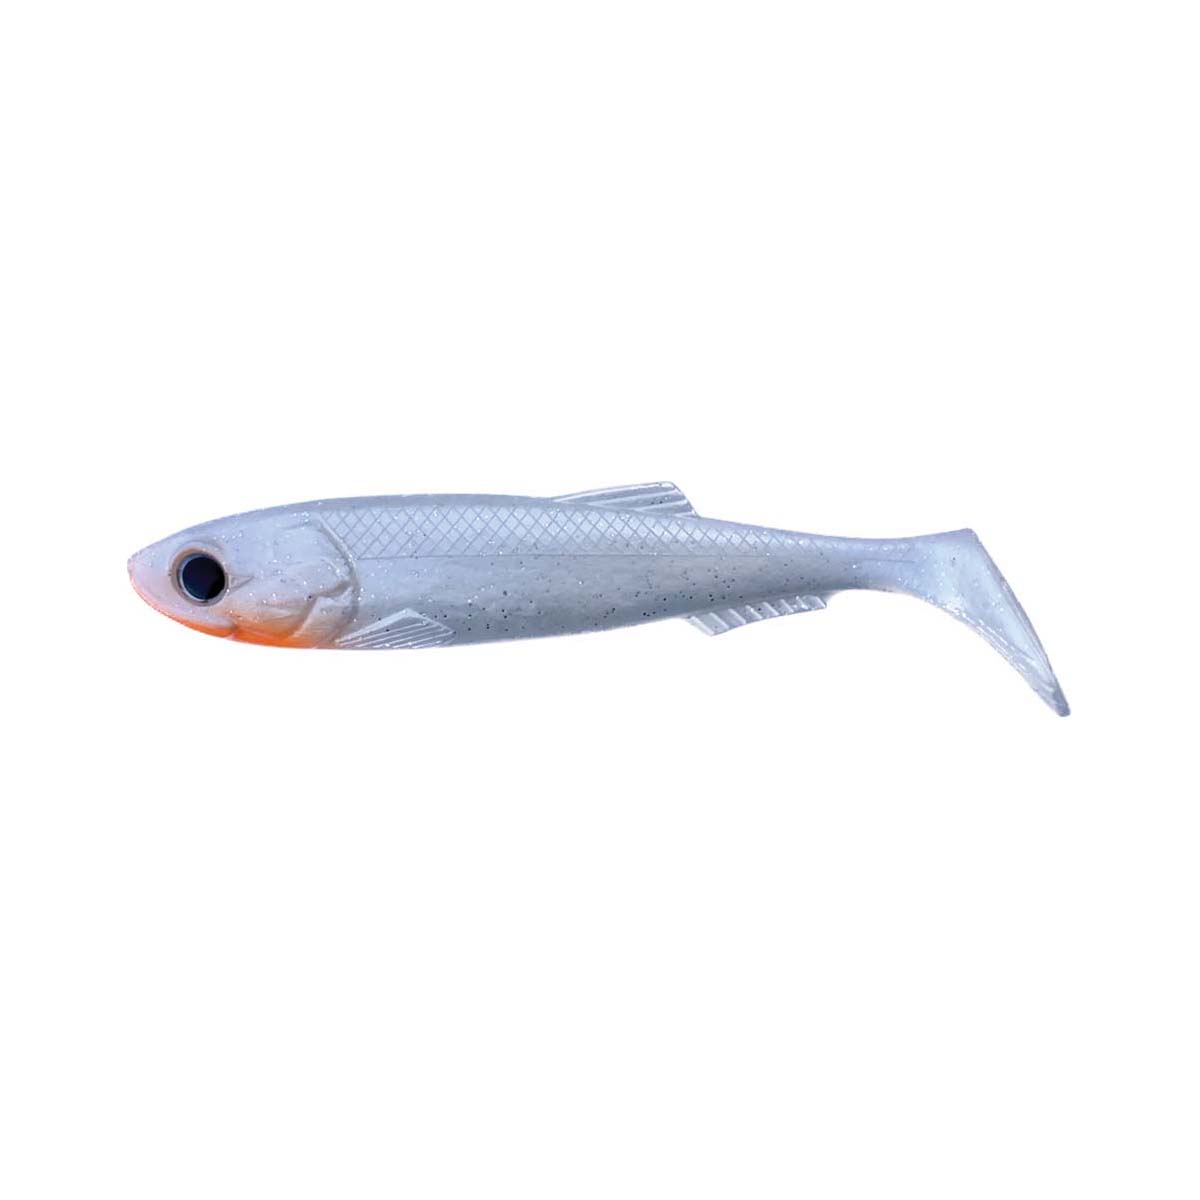 Molix RT Shad Soft Plastic Lure 5.5in Aussie Pearl White Silver Flake